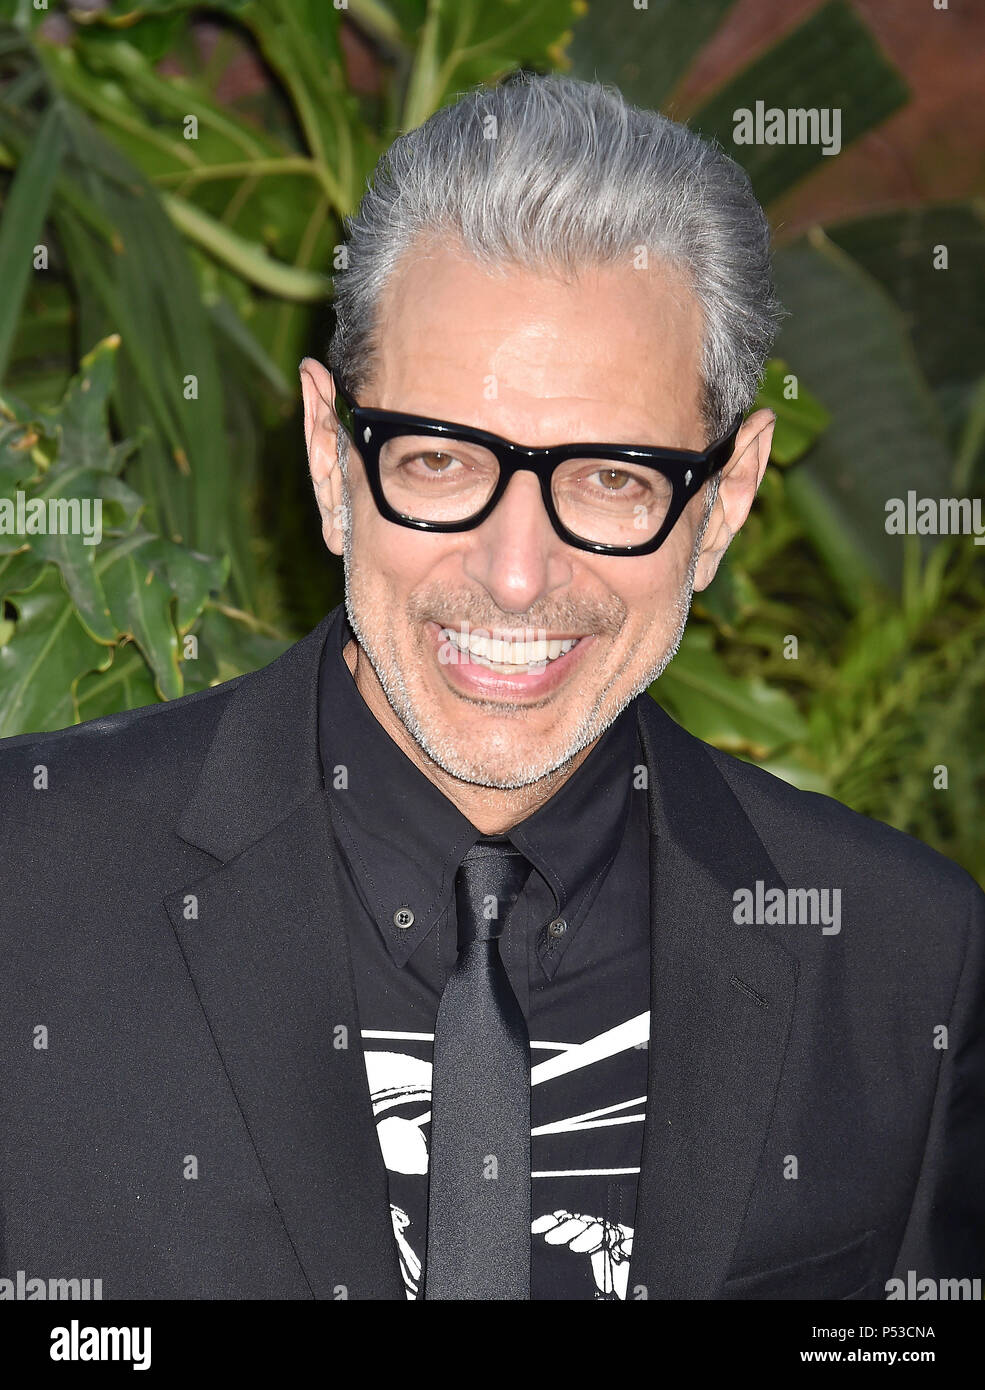 JEFF GOLDBLUM US film actor  attends the premiere of Universal Pictures and Amblin Entertainment's 'Jurassic World: Fallen Kingdom' at Walt Disney Concert Hall on June 12, 2018 in Los Angeles, California. Photo: Jeffrey Mayer Stock Photo